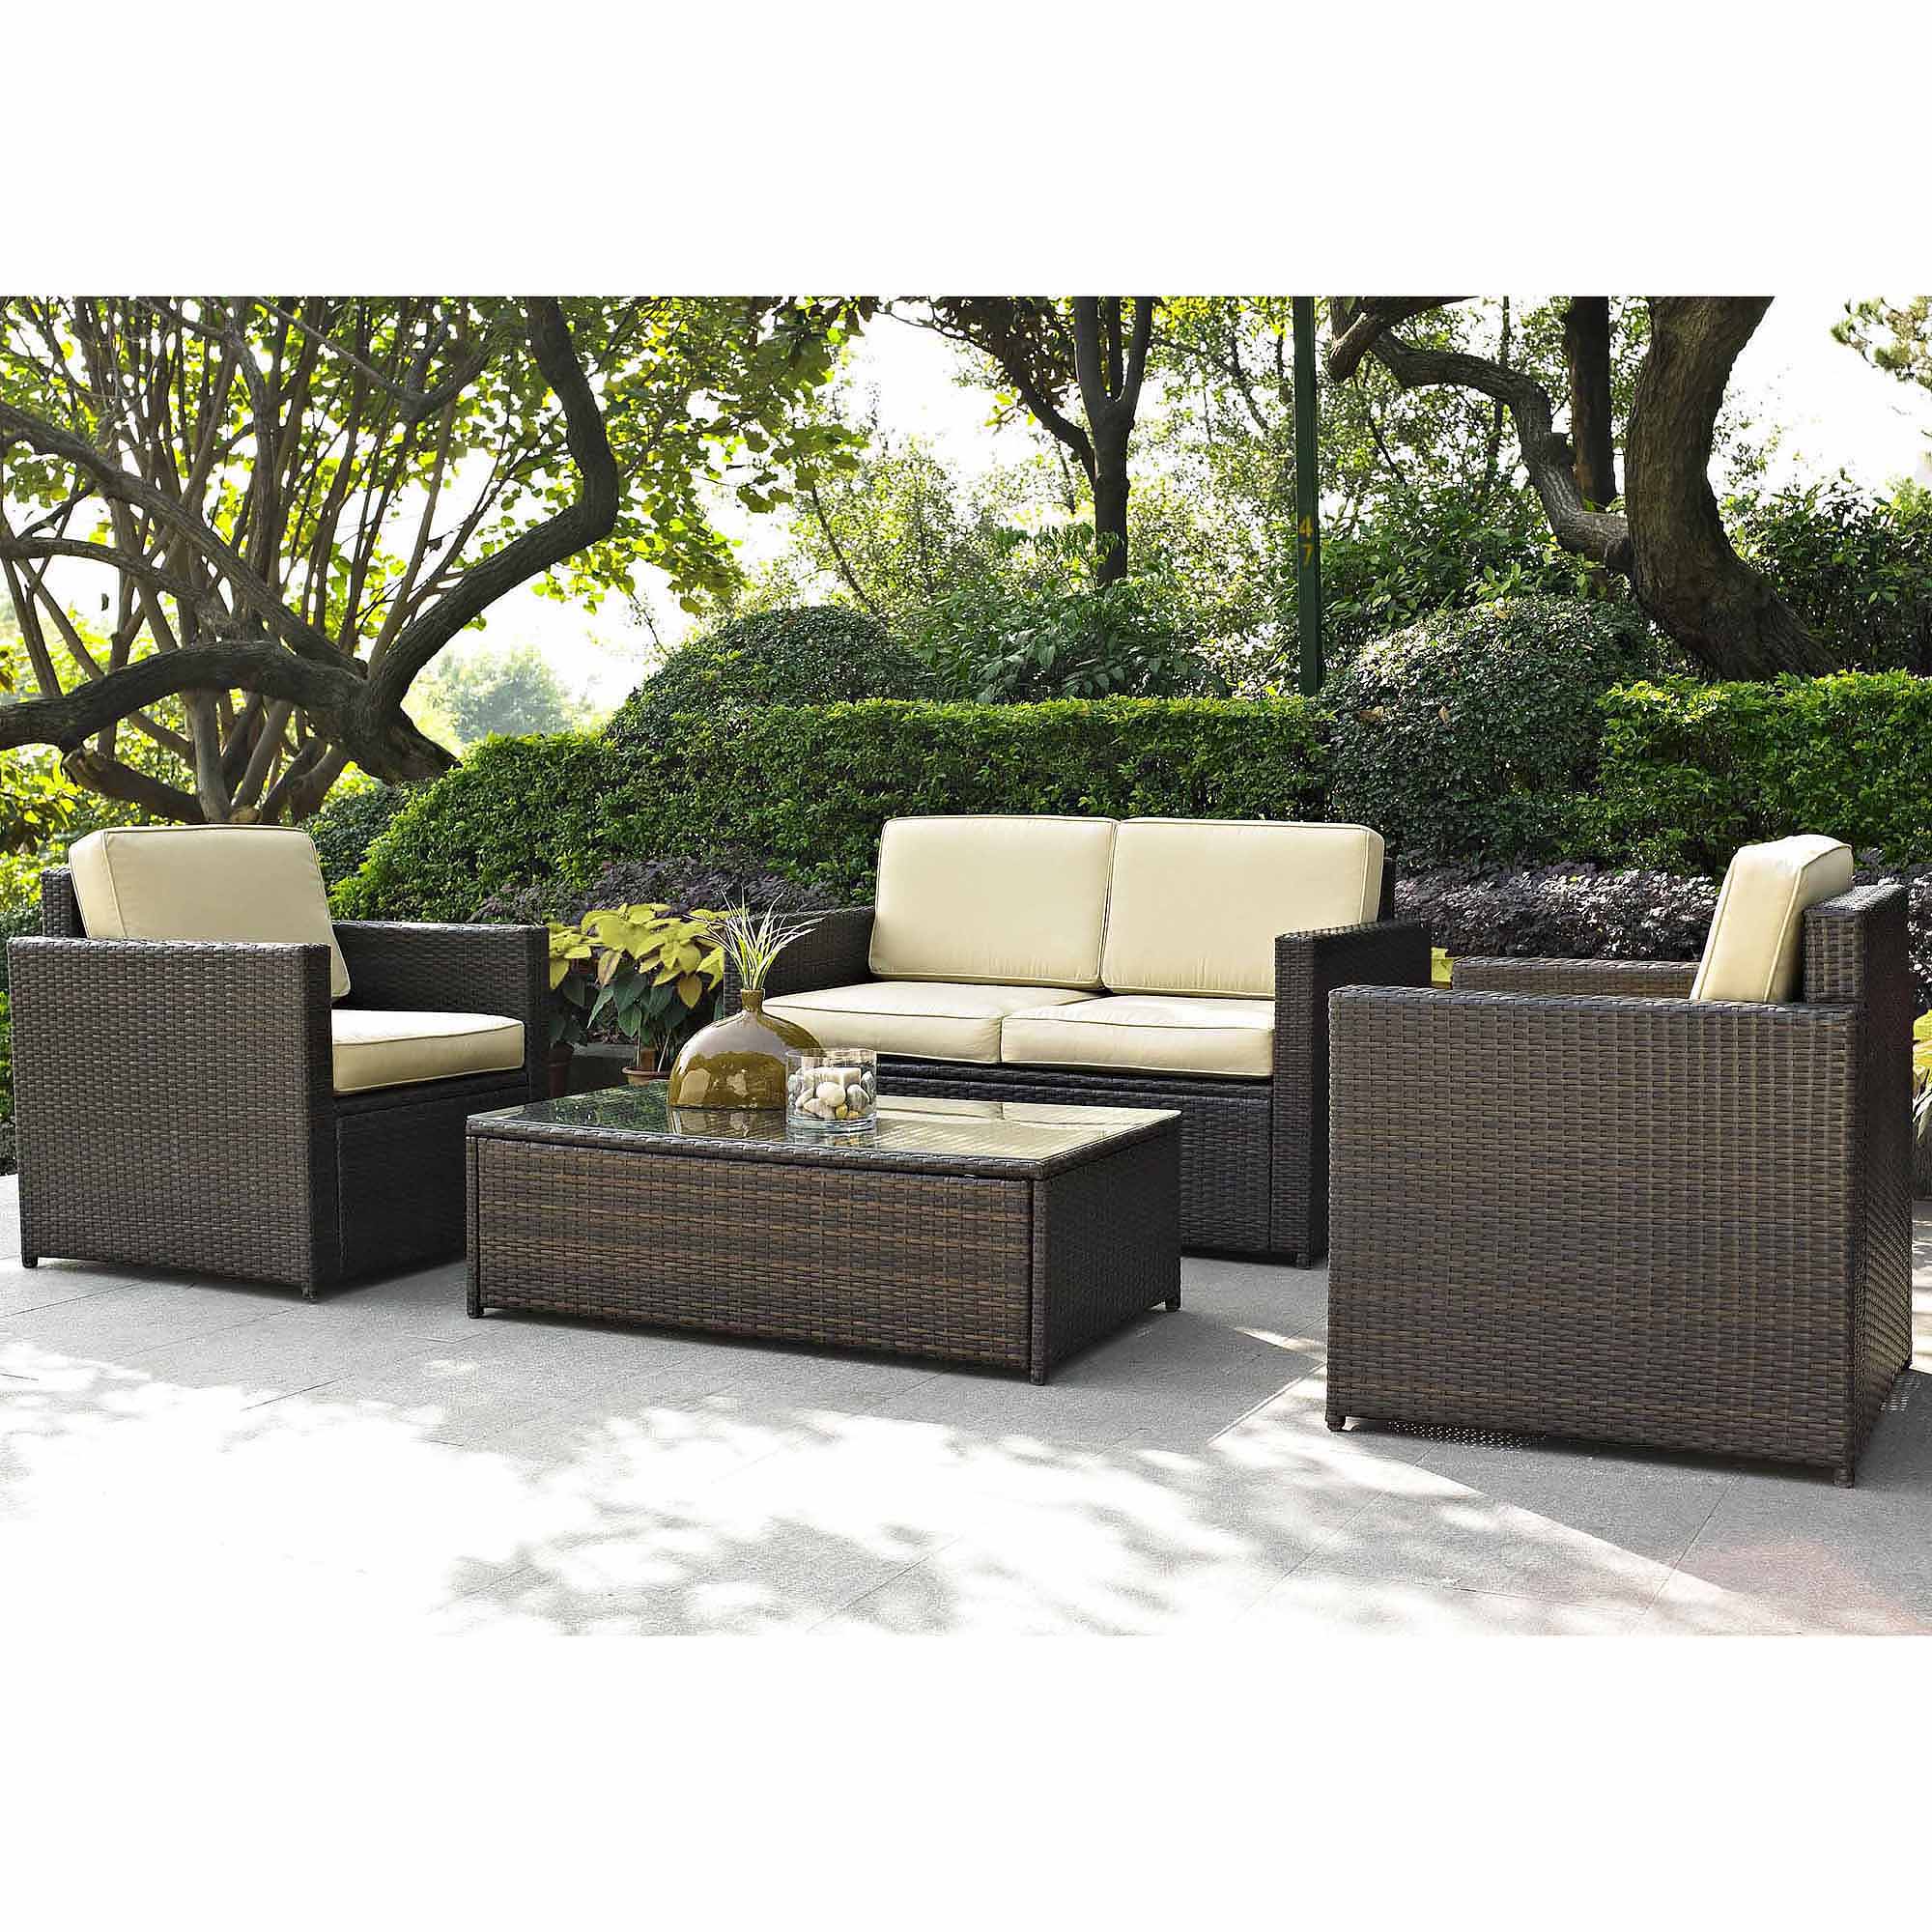 outdoor wicker furniture best choice products outdoor garden patio 4pc cushioned seat black wicker  sofa FATEUKY